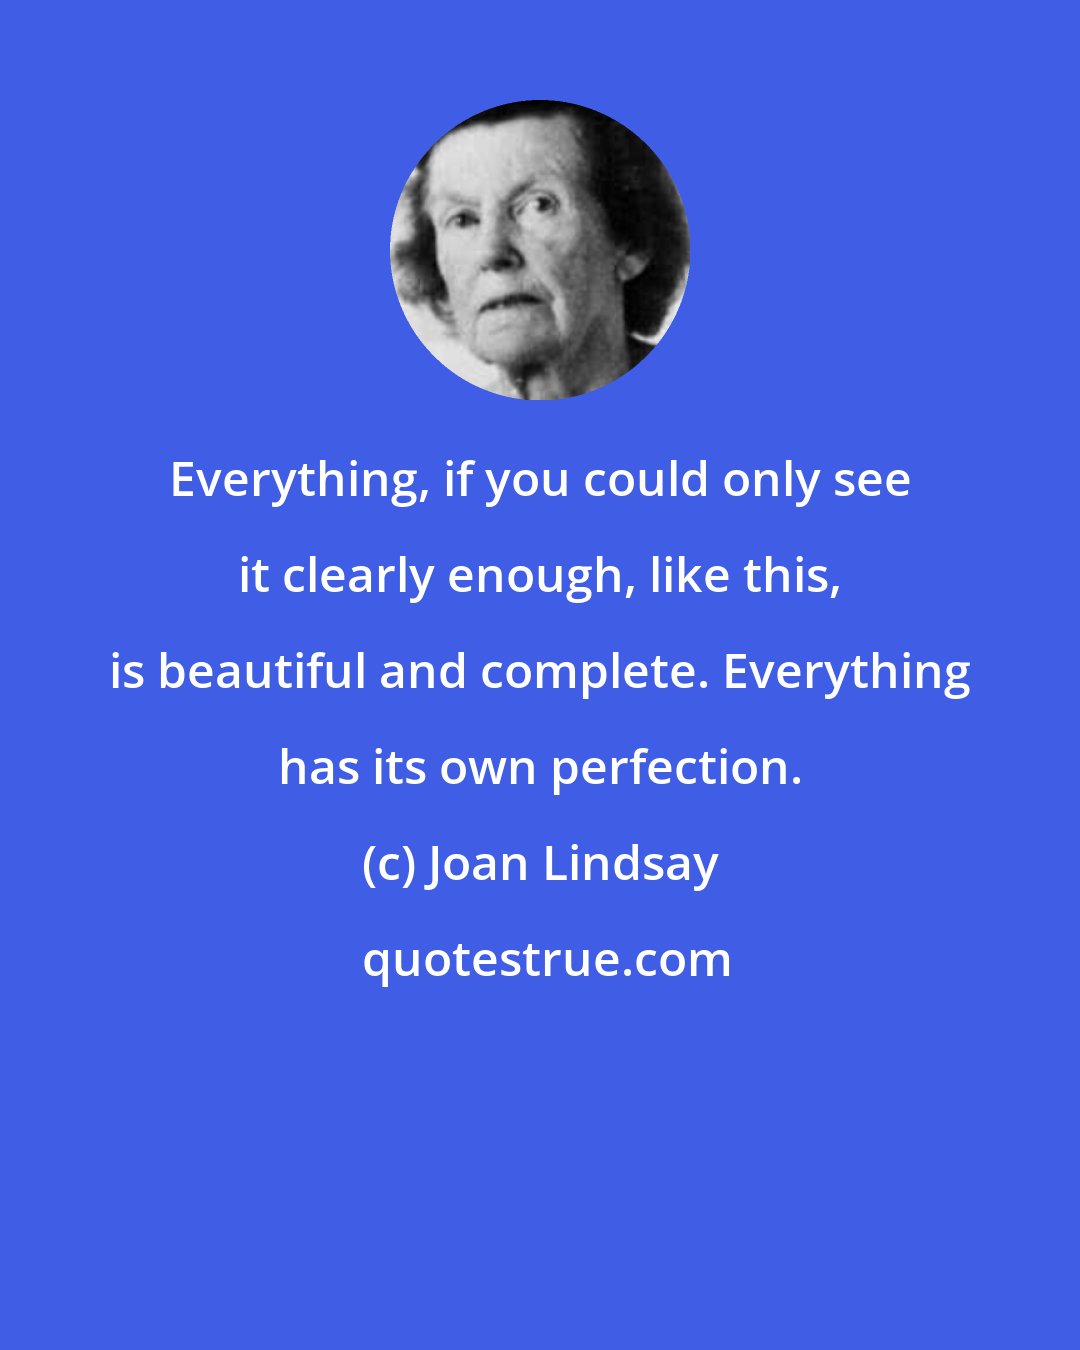 Joan Lindsay: Everything, if you could only see it clearly enough, like this, is beautiful and complete. Everything has its own perfection.